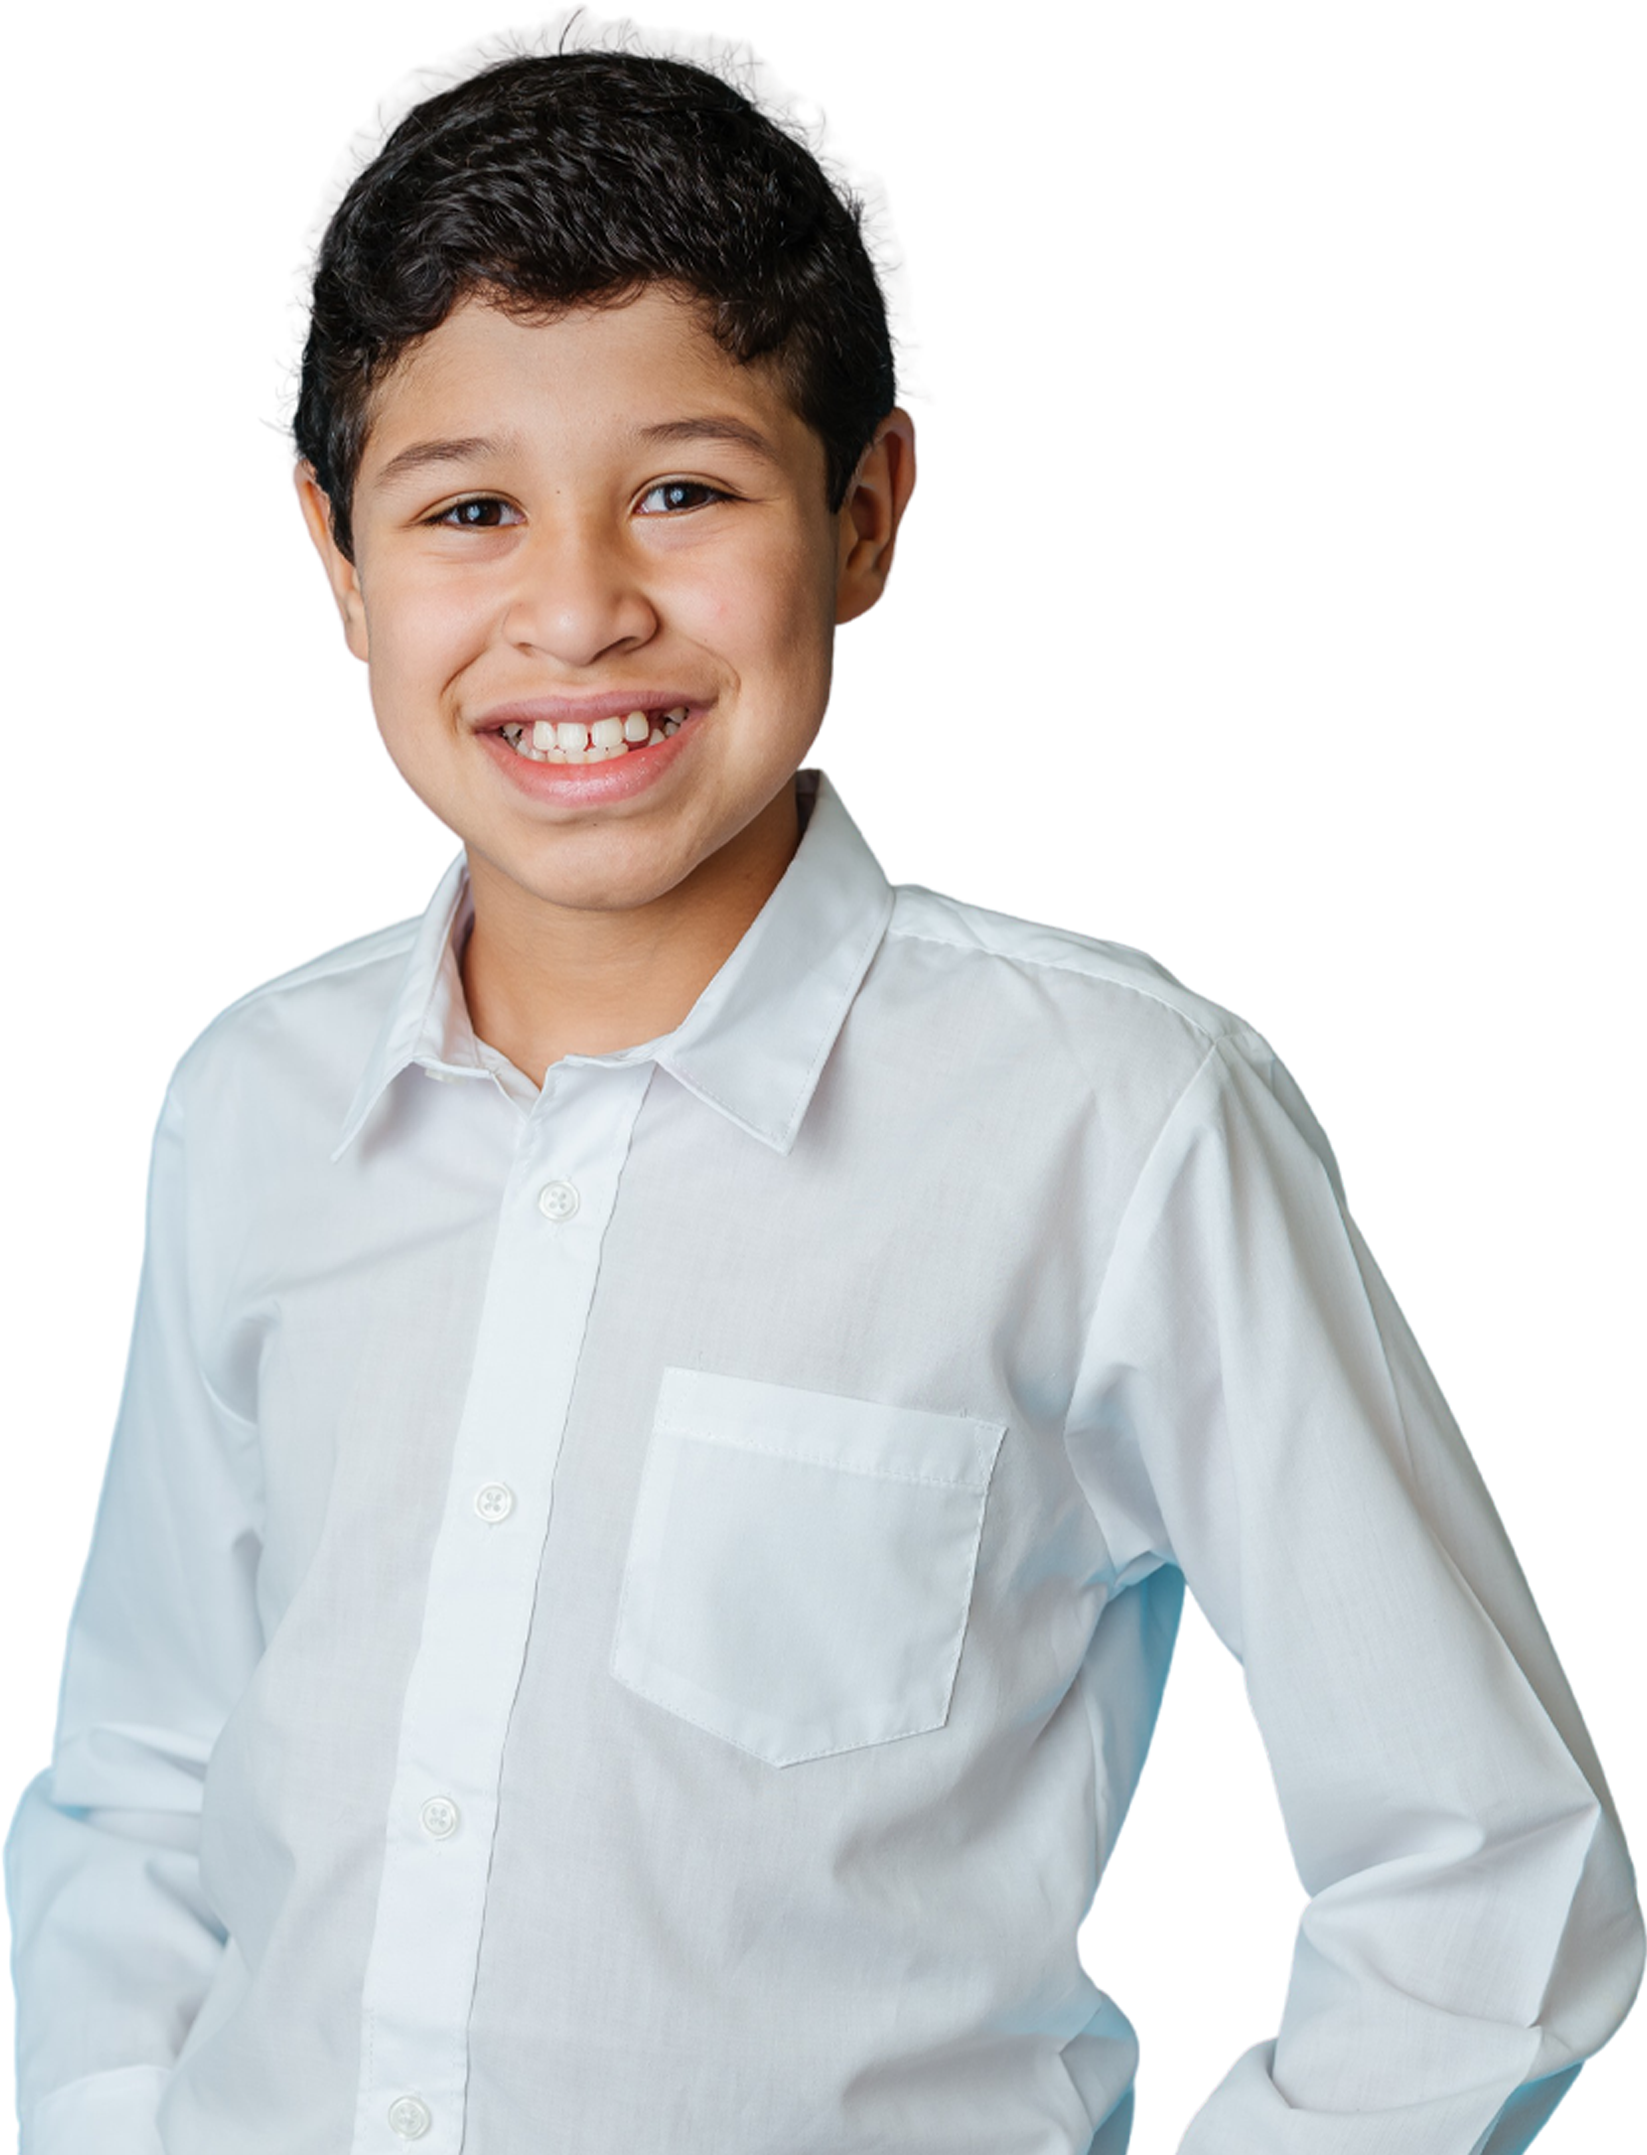 A small boy posing for the camera, and smiling for a photo. He is wearing formal attire.